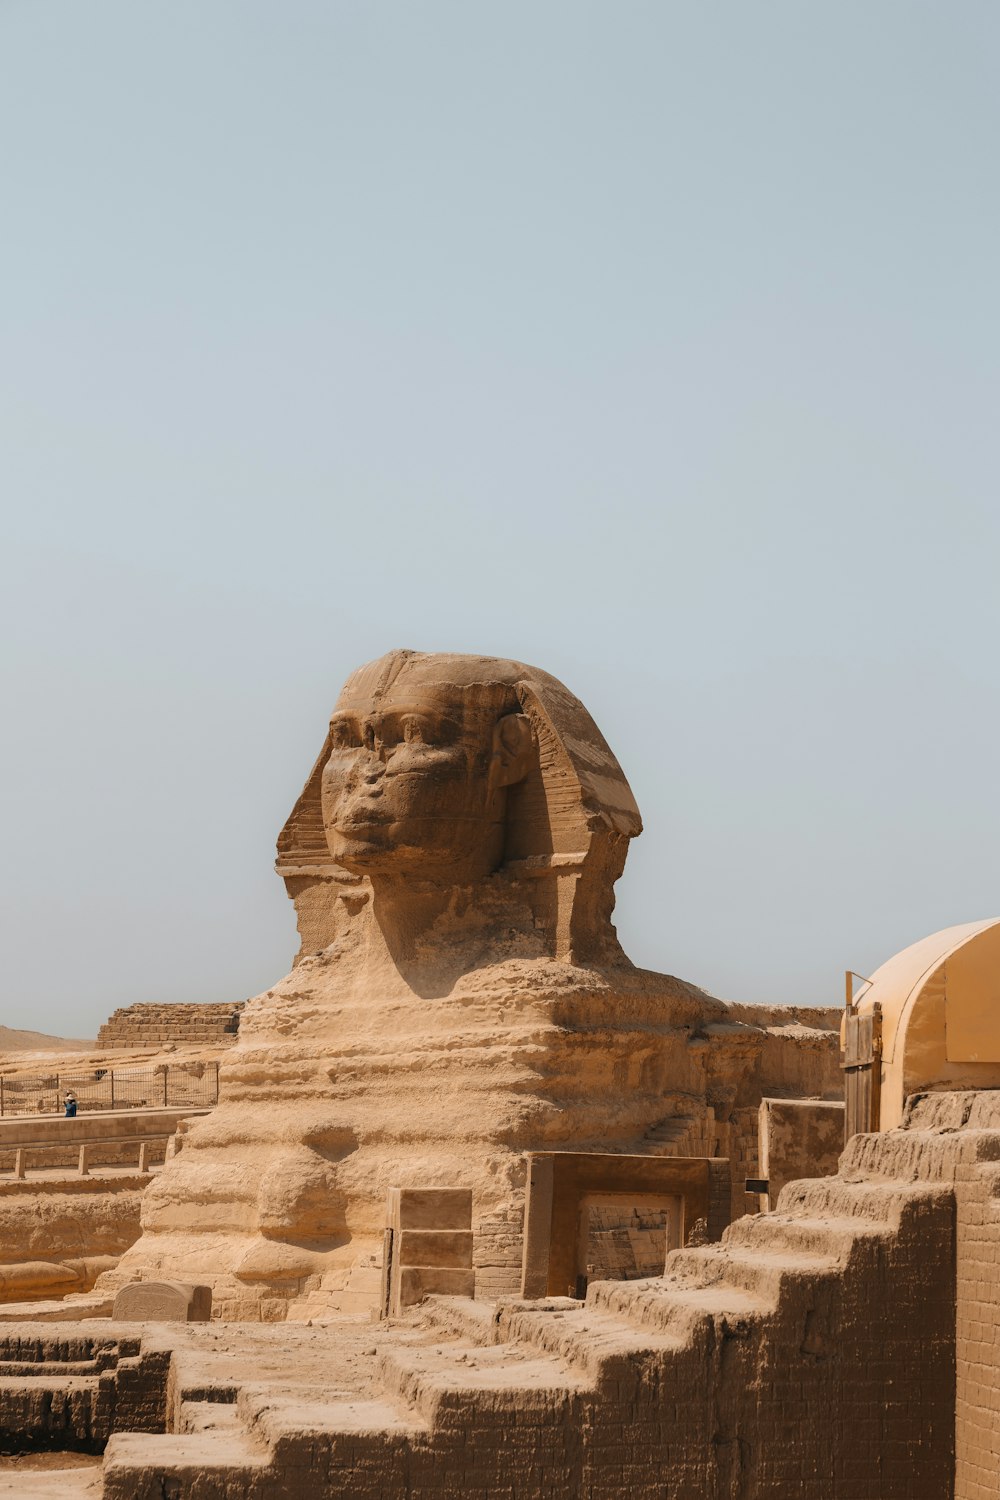 a large sphinx statue in the middle of a desert